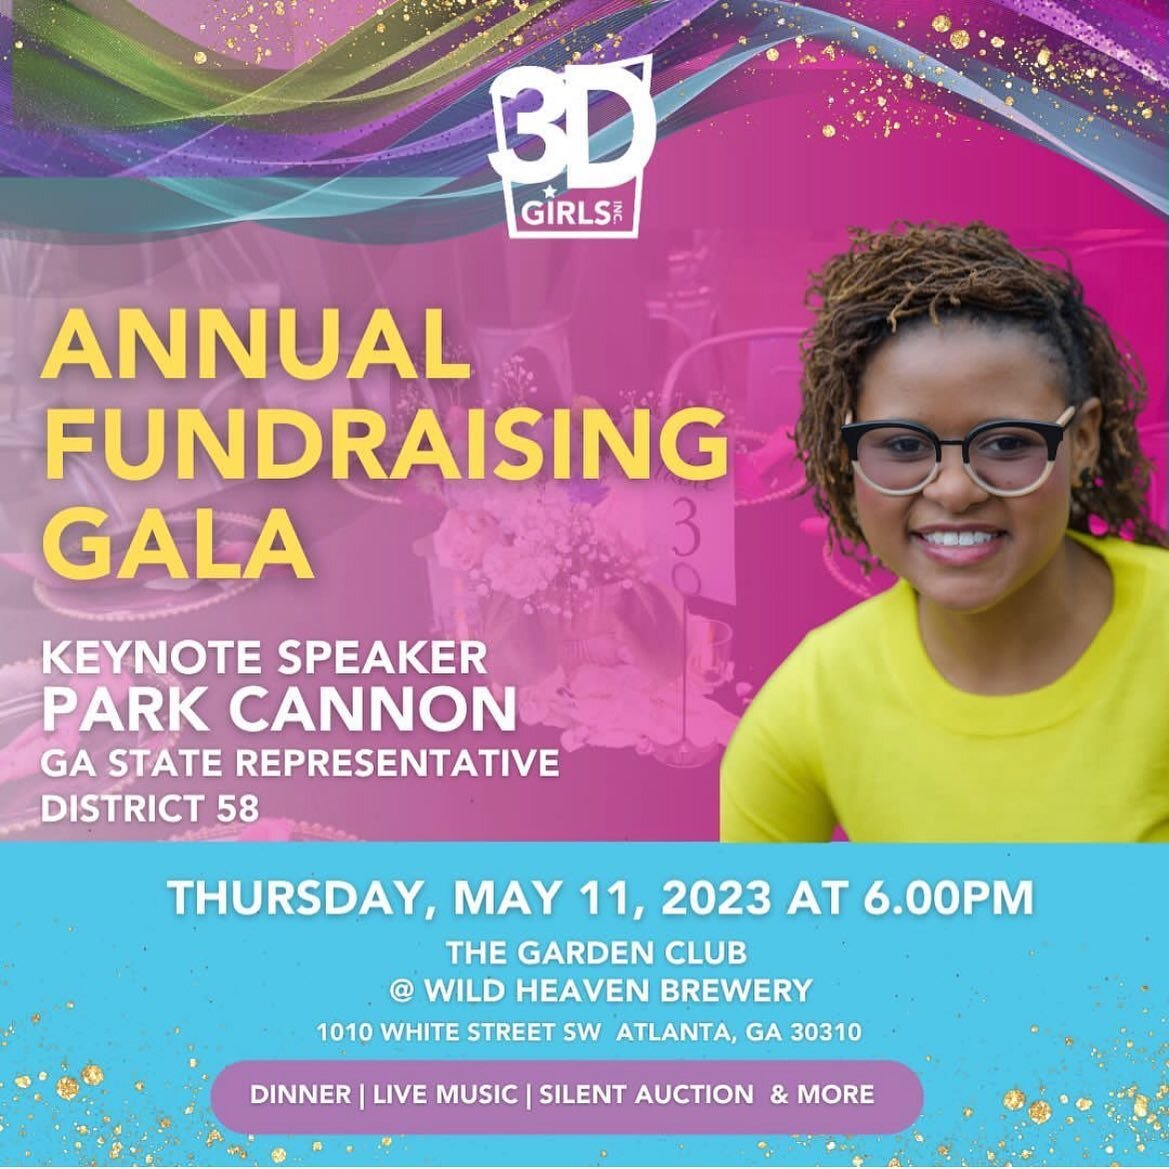 Tonight is the big night! Are you near the west end in District 58? If so, head over to @wildheavenwestend this evening for a celebration that supports the mental, physical, emotional and financial health of young folks in metro Atlanta! There are so